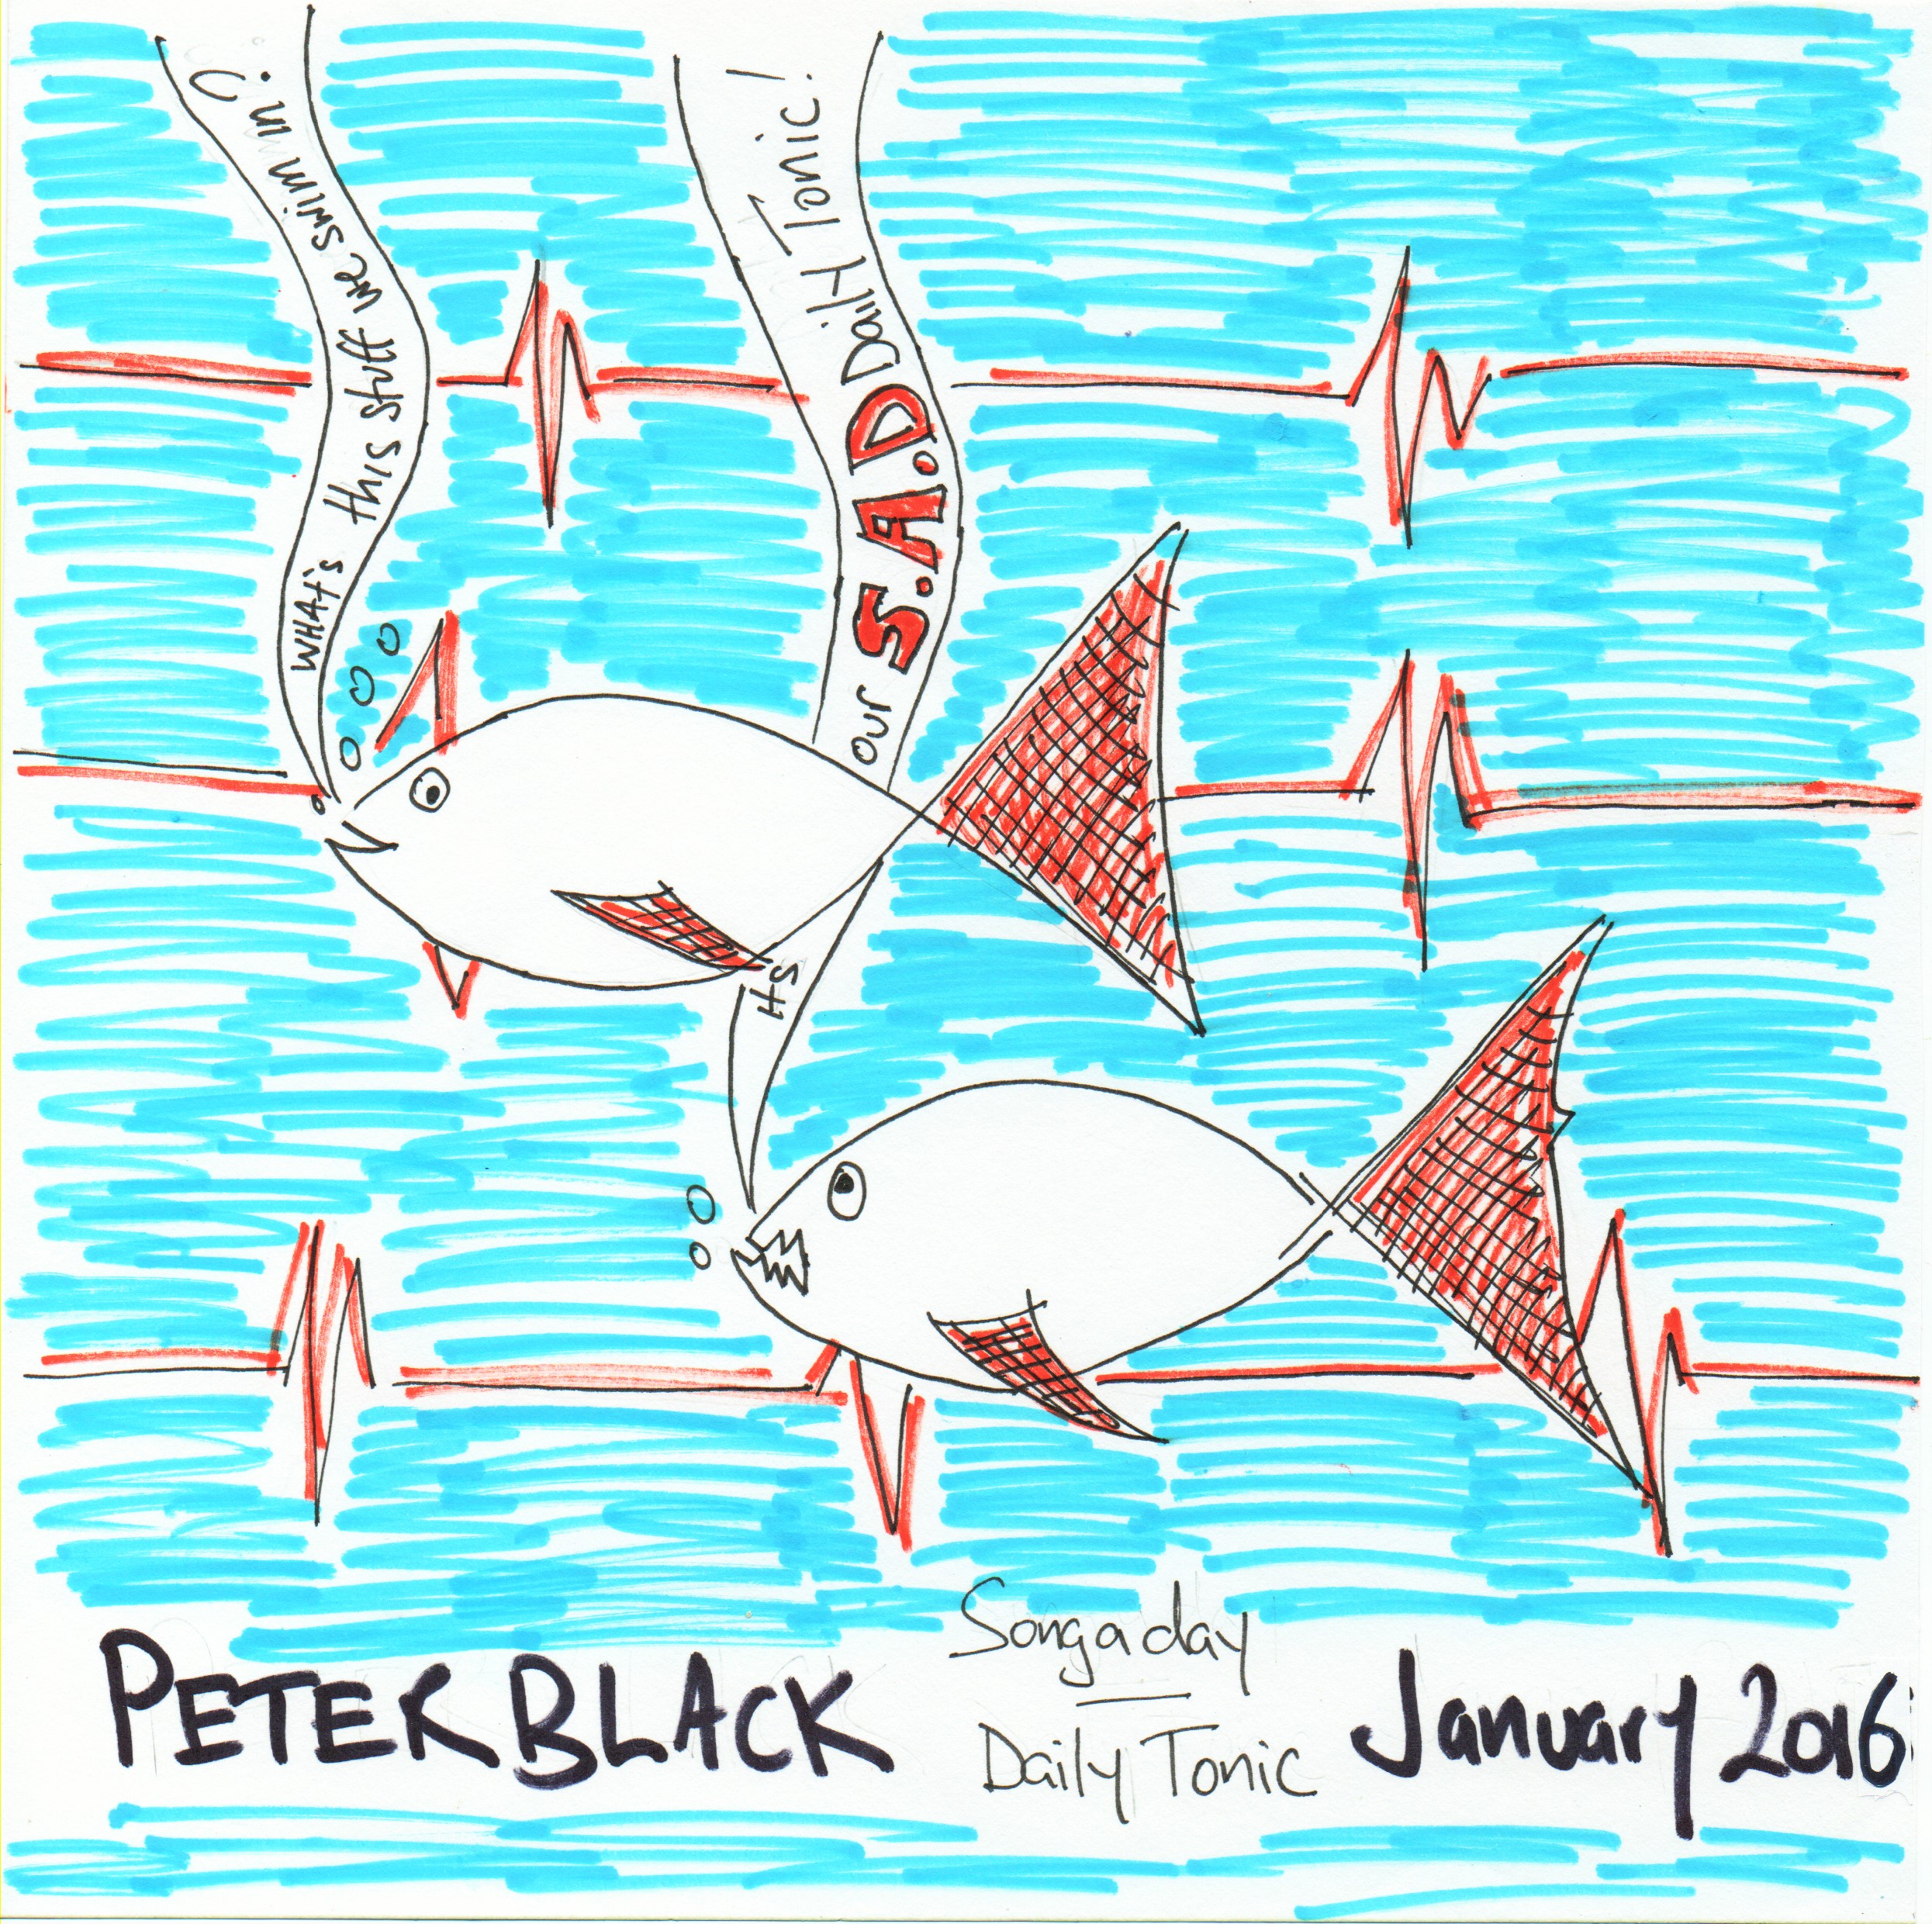 Peter 'Blackie' Black - SONG A DAY / January 2016